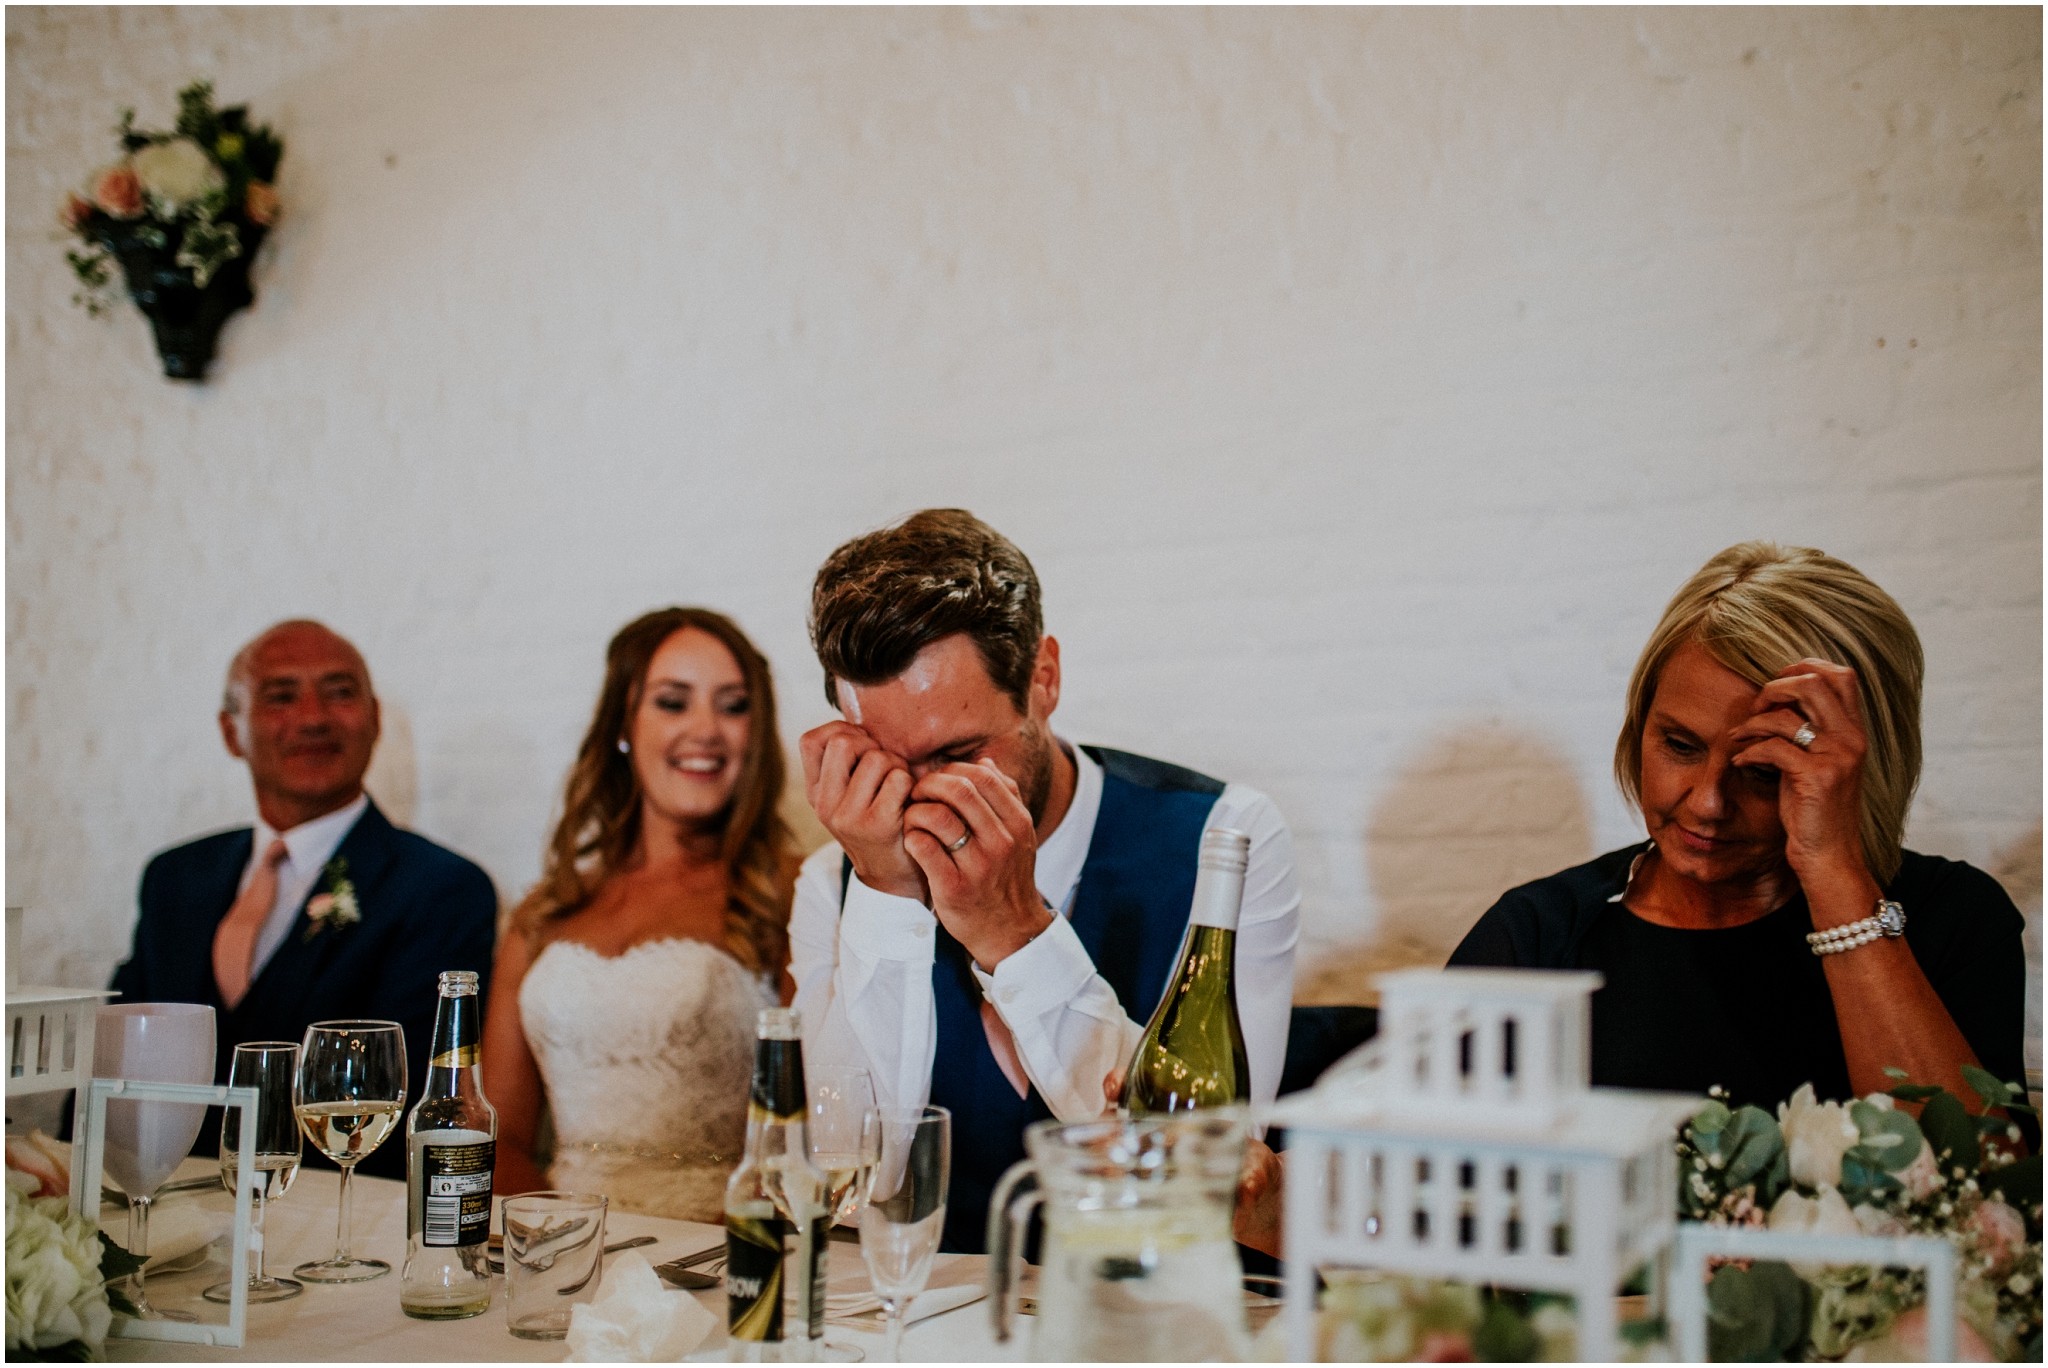 groom looking embarrased during speeches